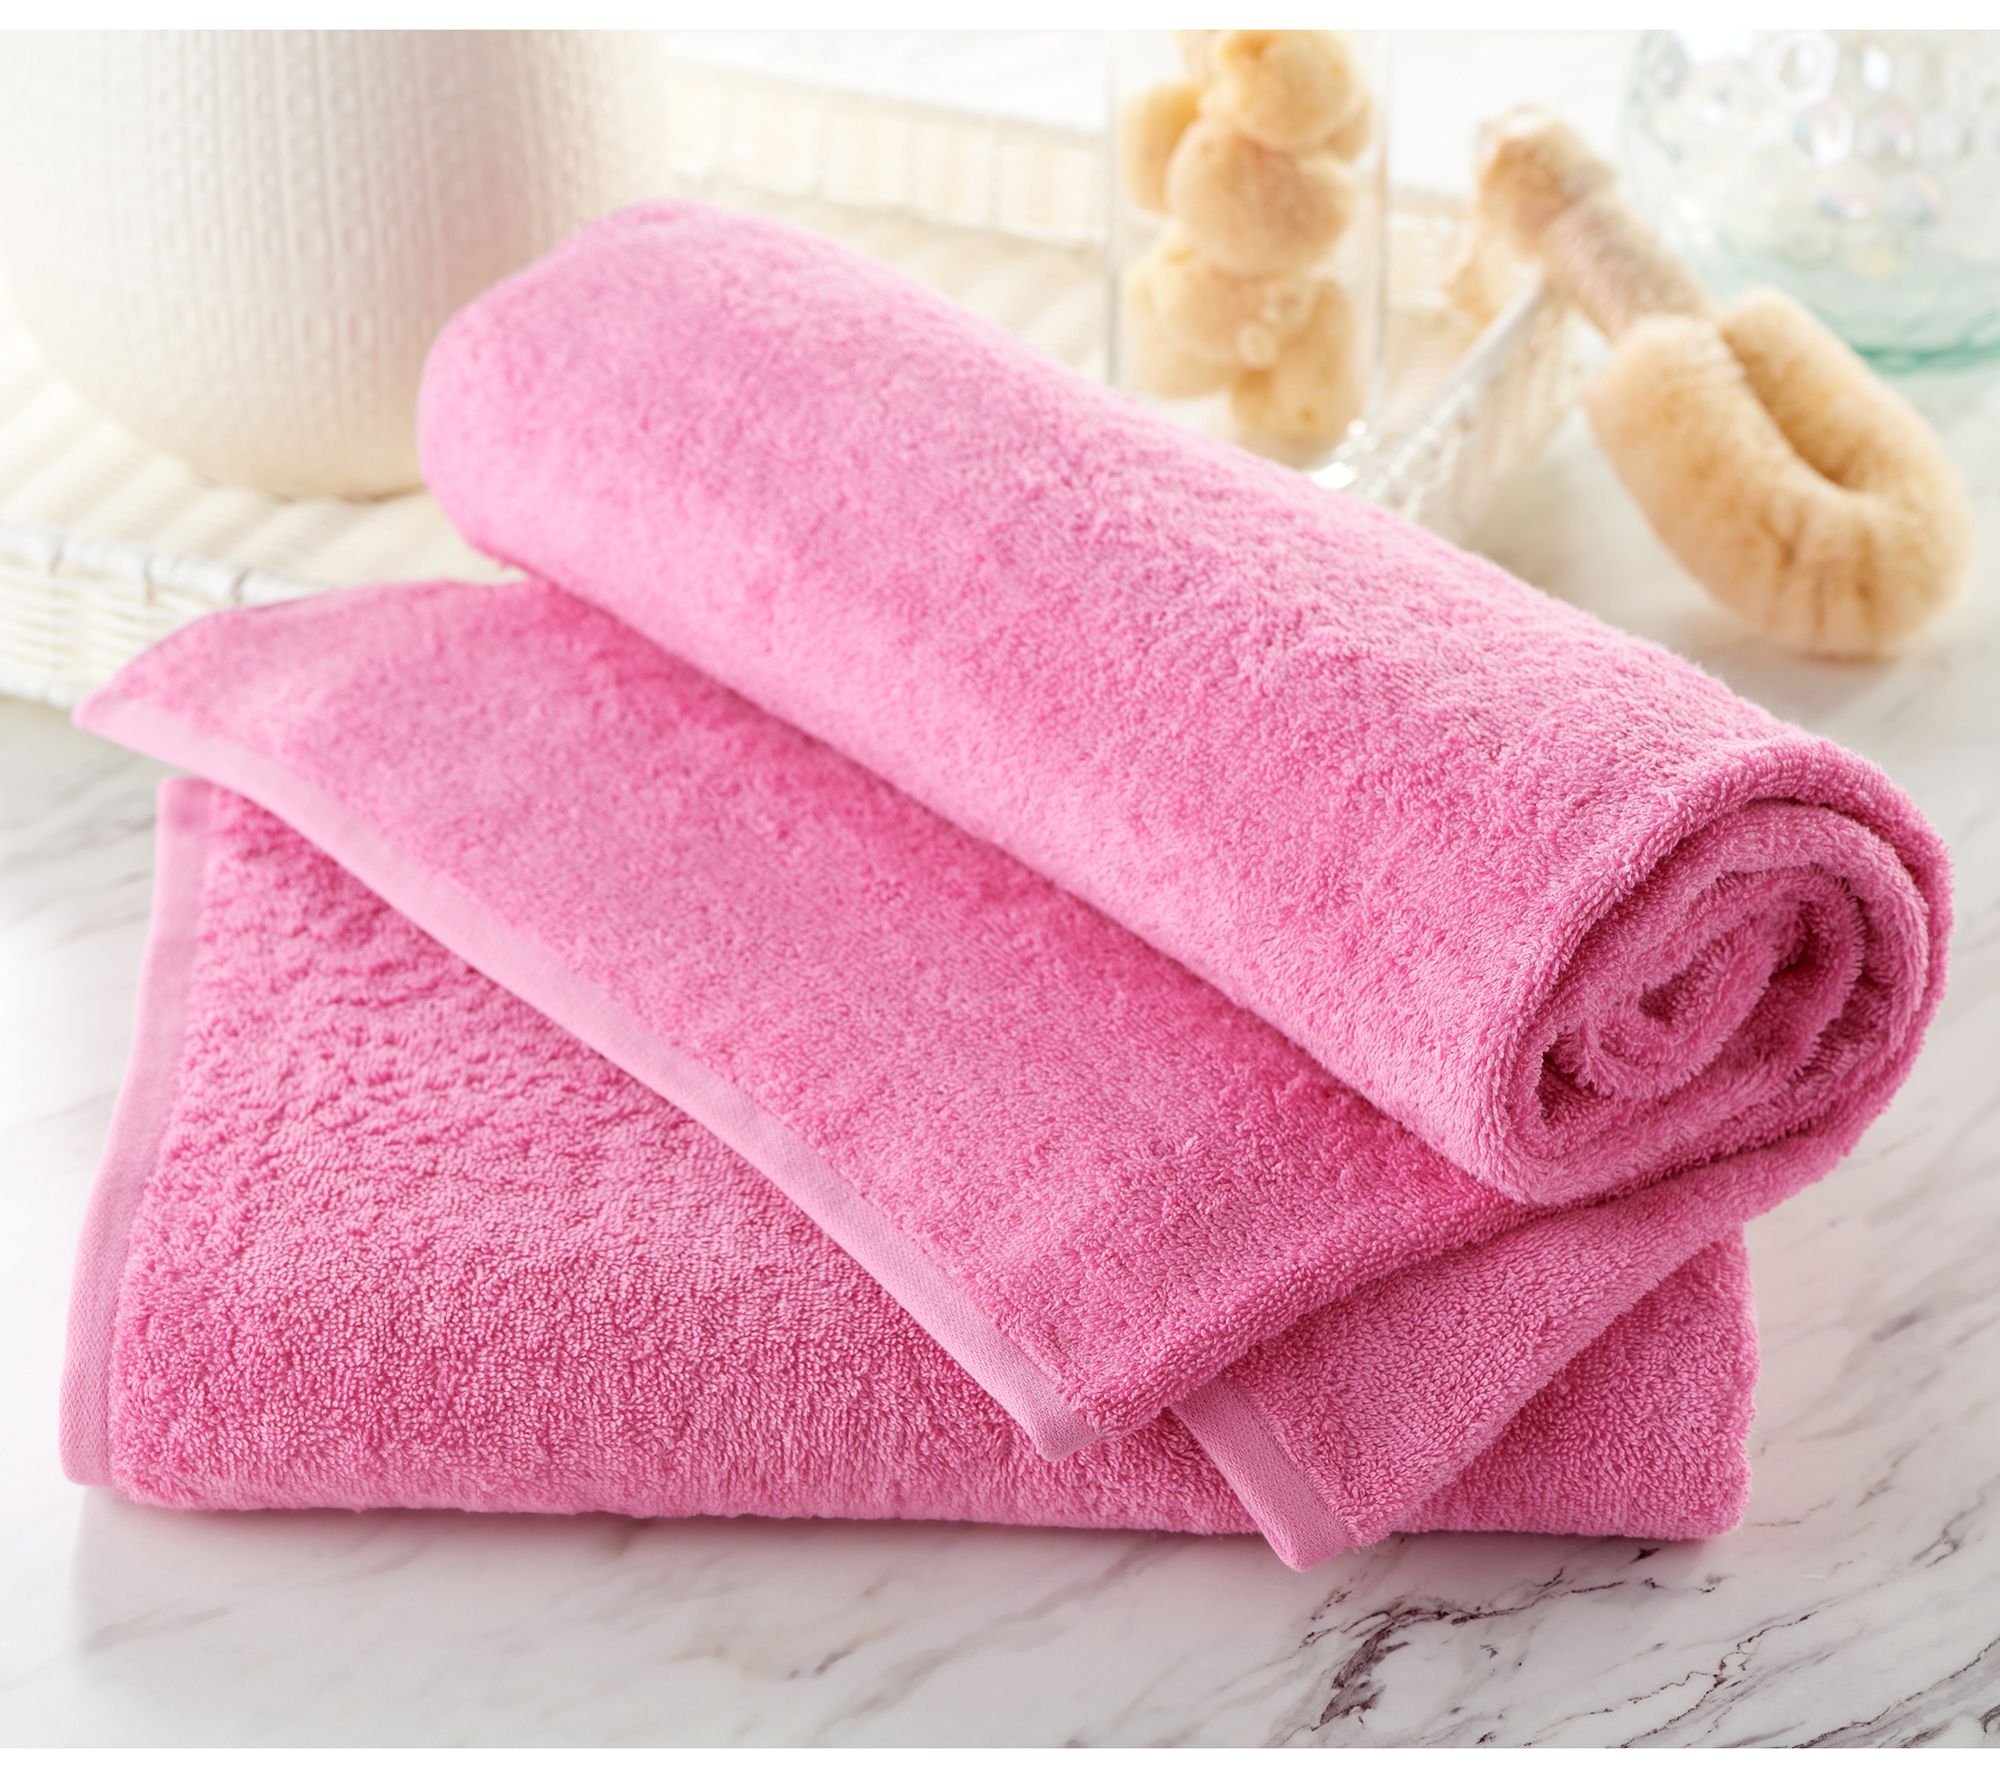 Active Network properties: Keep towels soft and fluffy